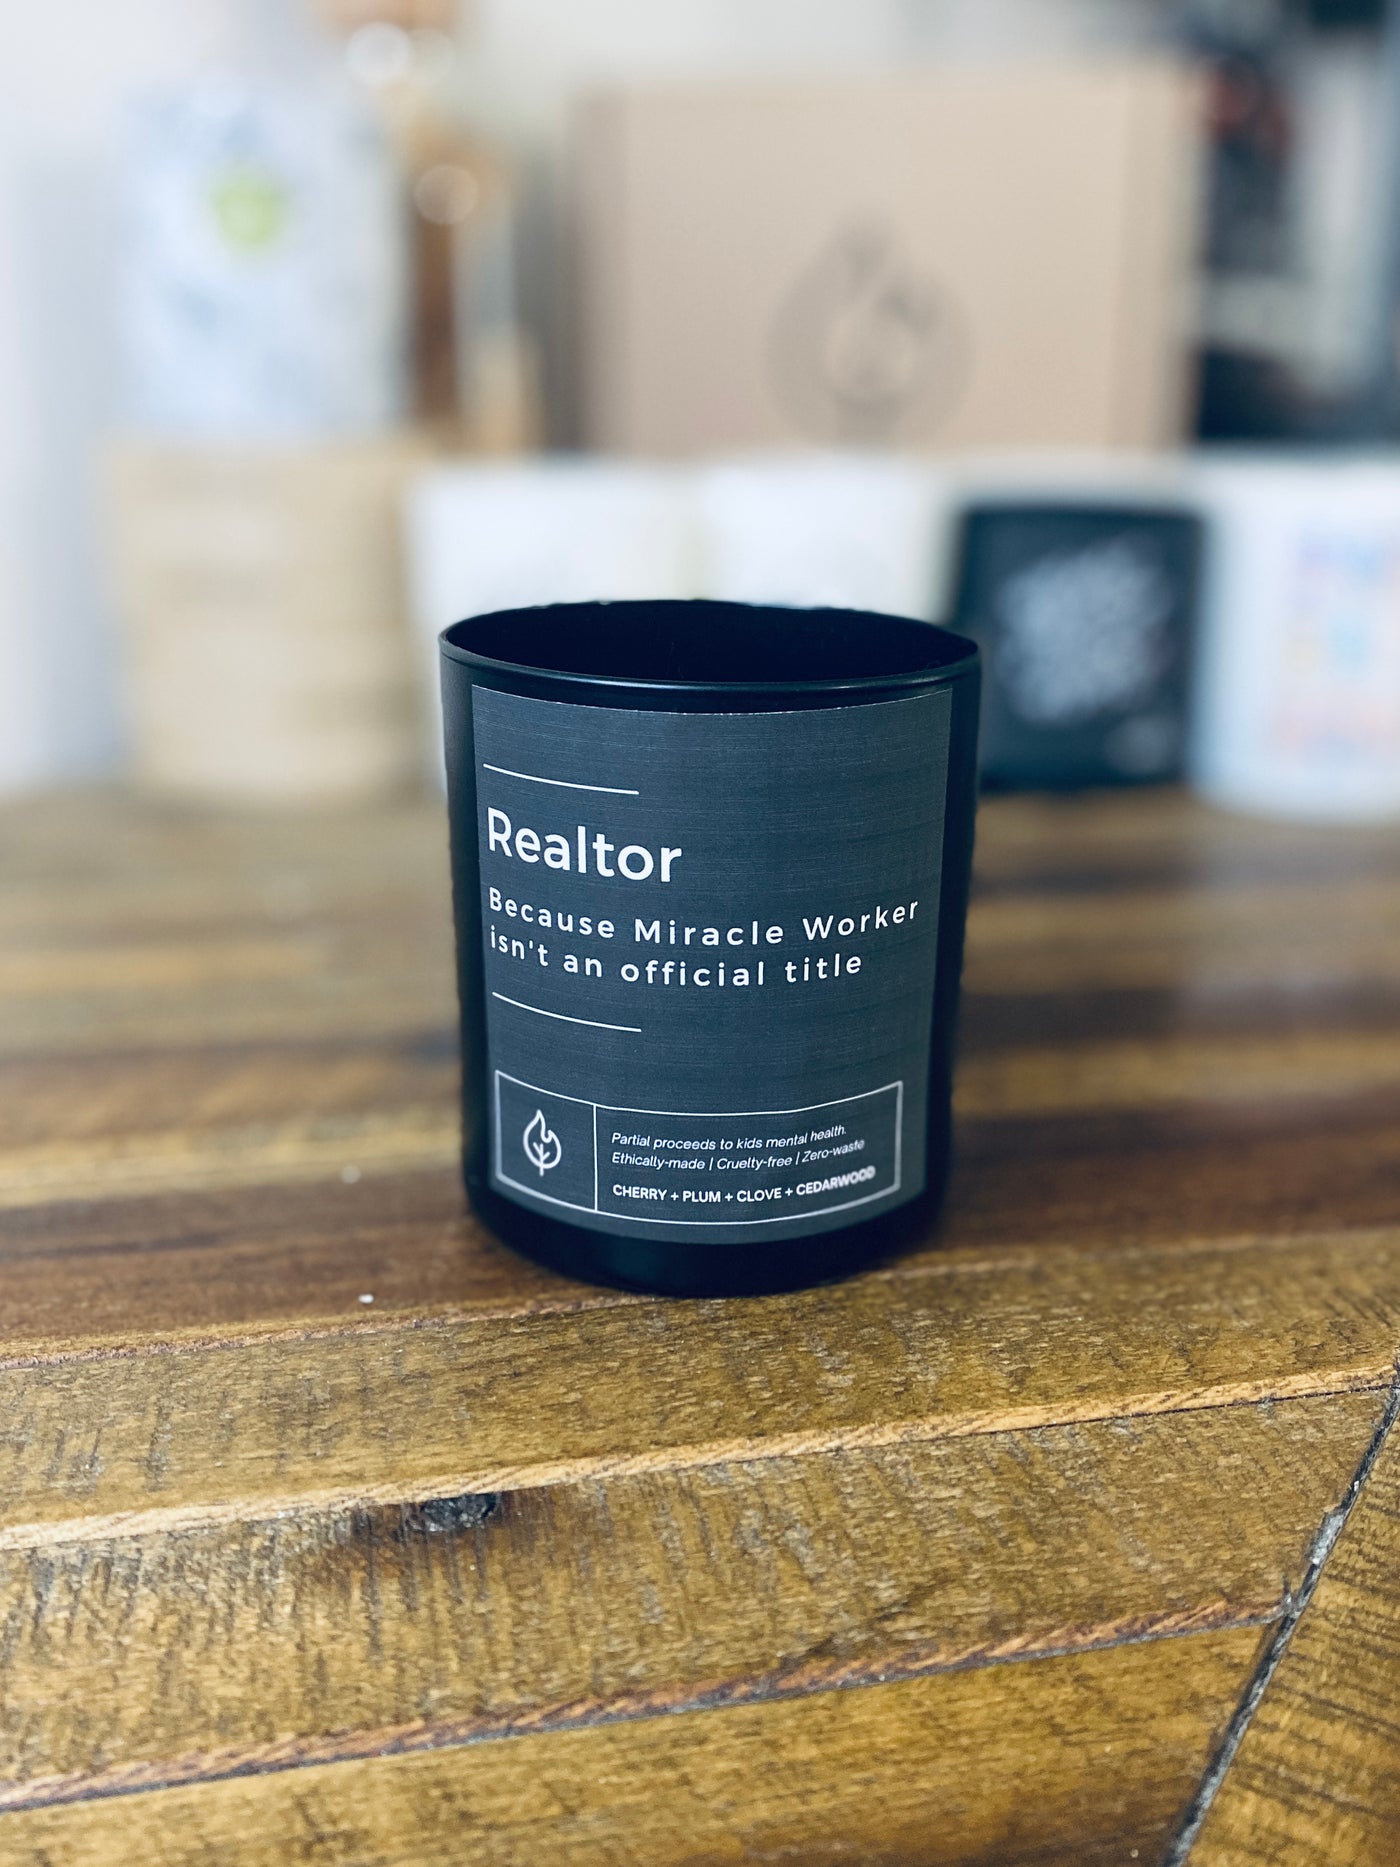 The Realtor Candle